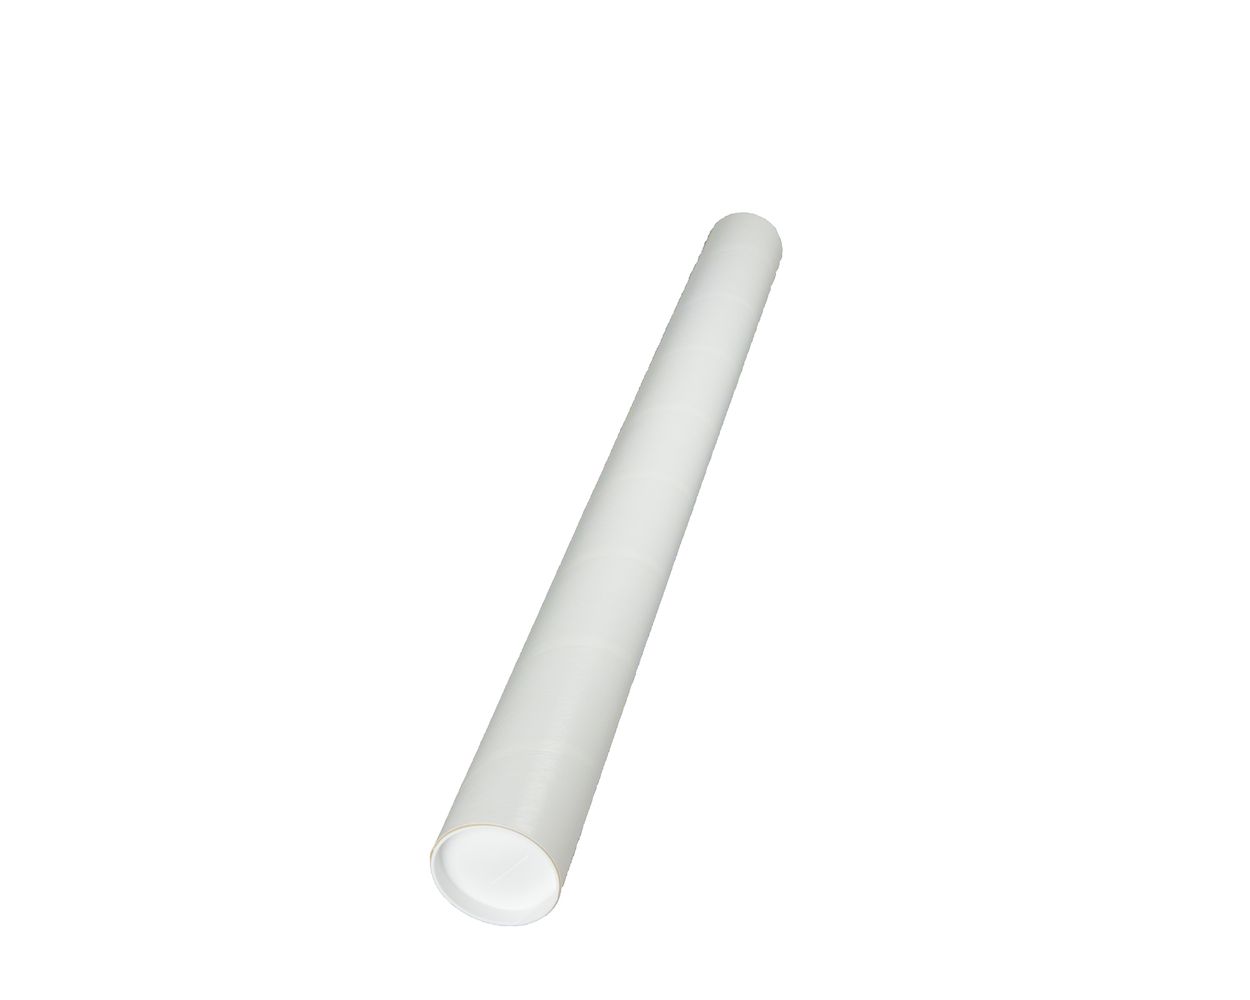 Coastwide Professional™ 3 x 24 Mailing Tube with Caps, White, 12